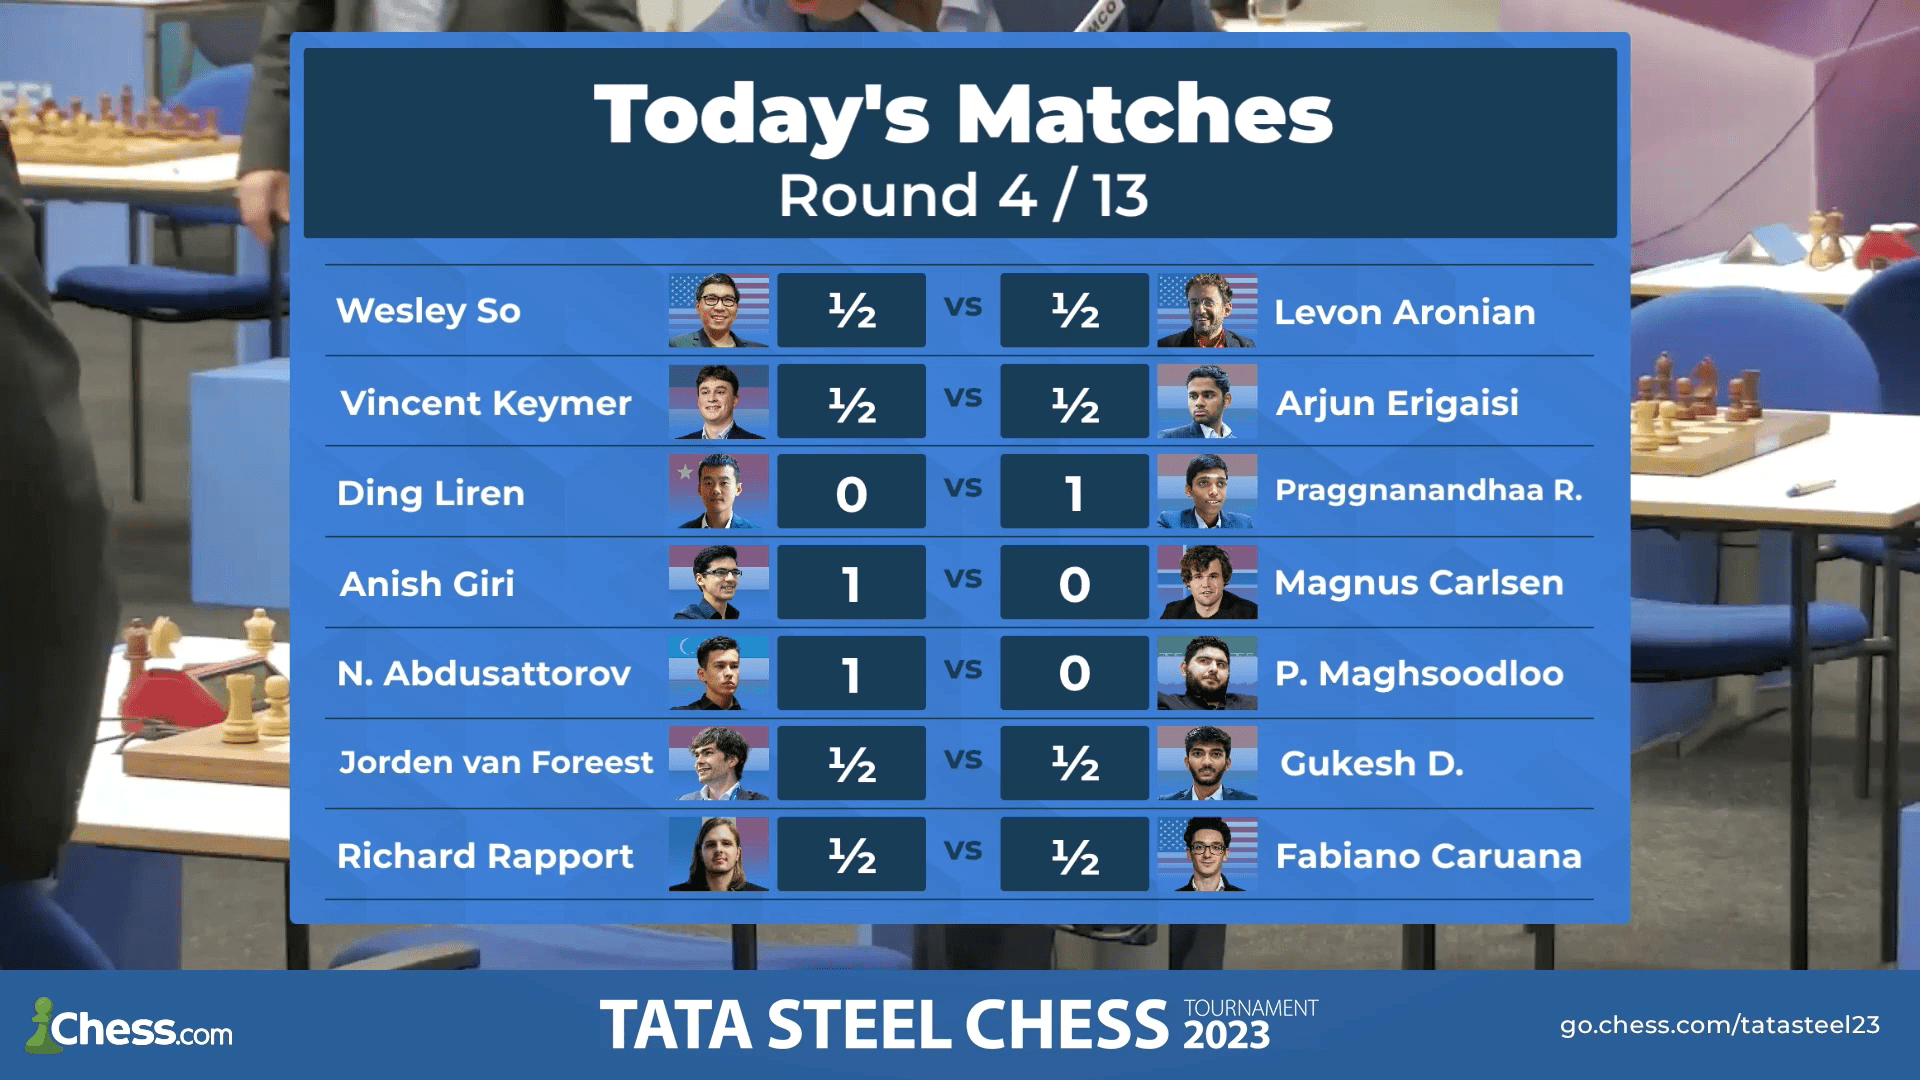 TATA STEEL CHESS 2023 Masters Section Infographic : r/chess